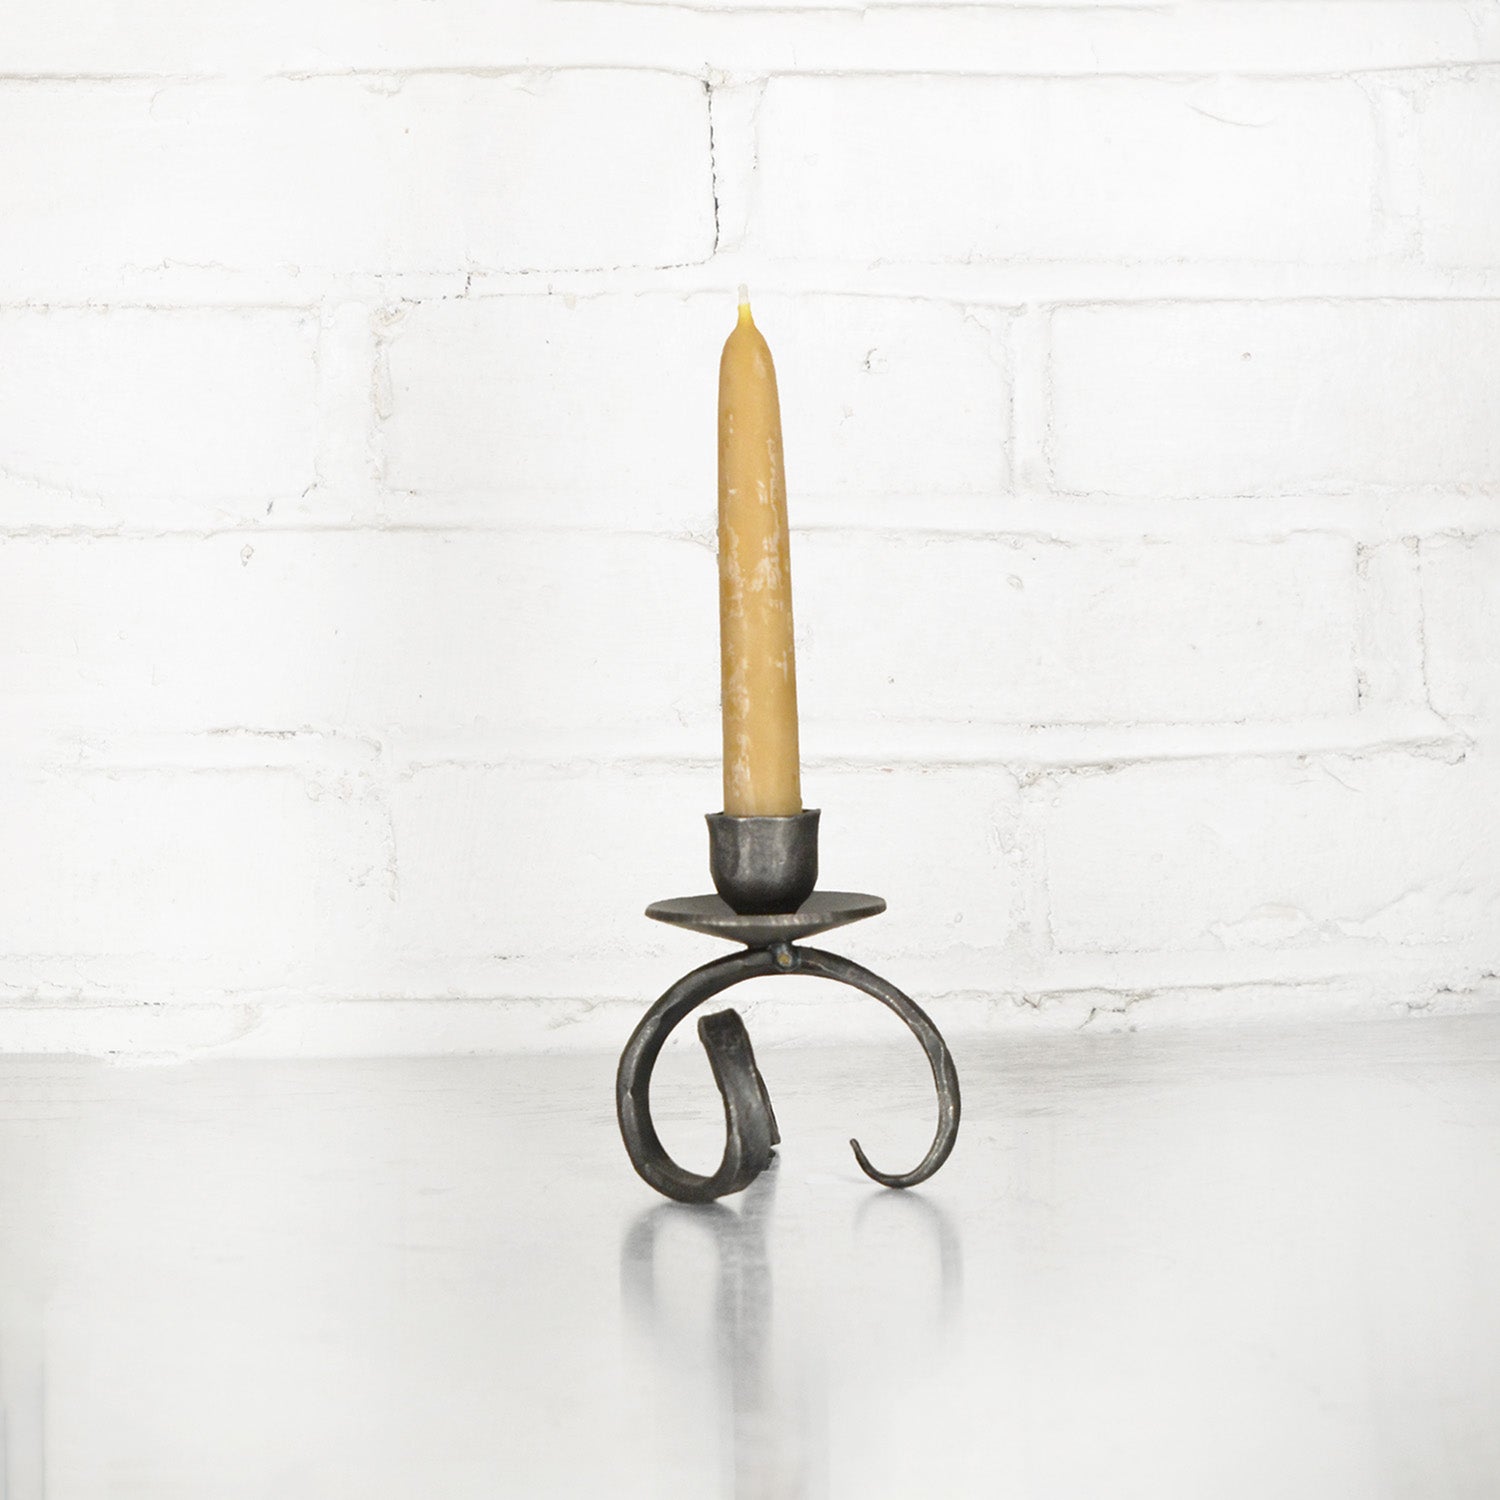 NEW! Individual Sculptural Candle Holder by Blackthorne Forge